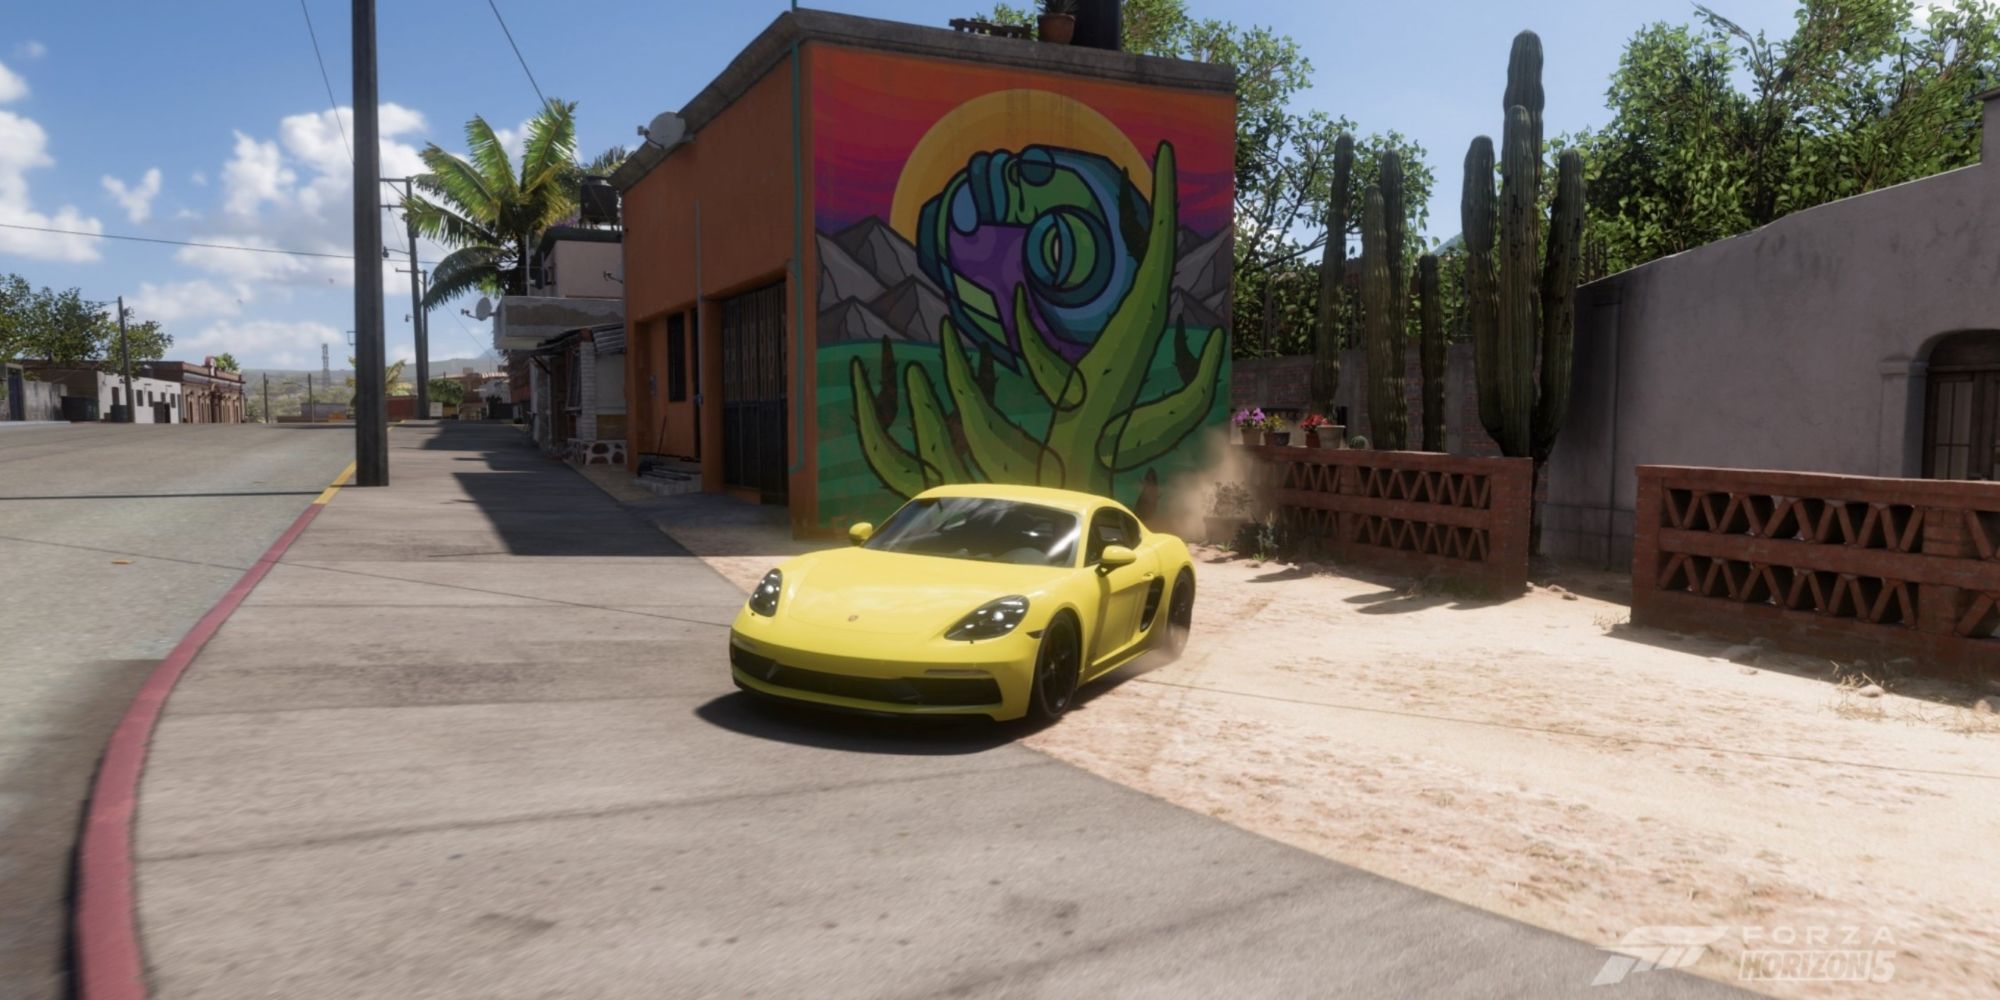 How to Find Star 27’s Mural in Mulege in Forza Horizon 5